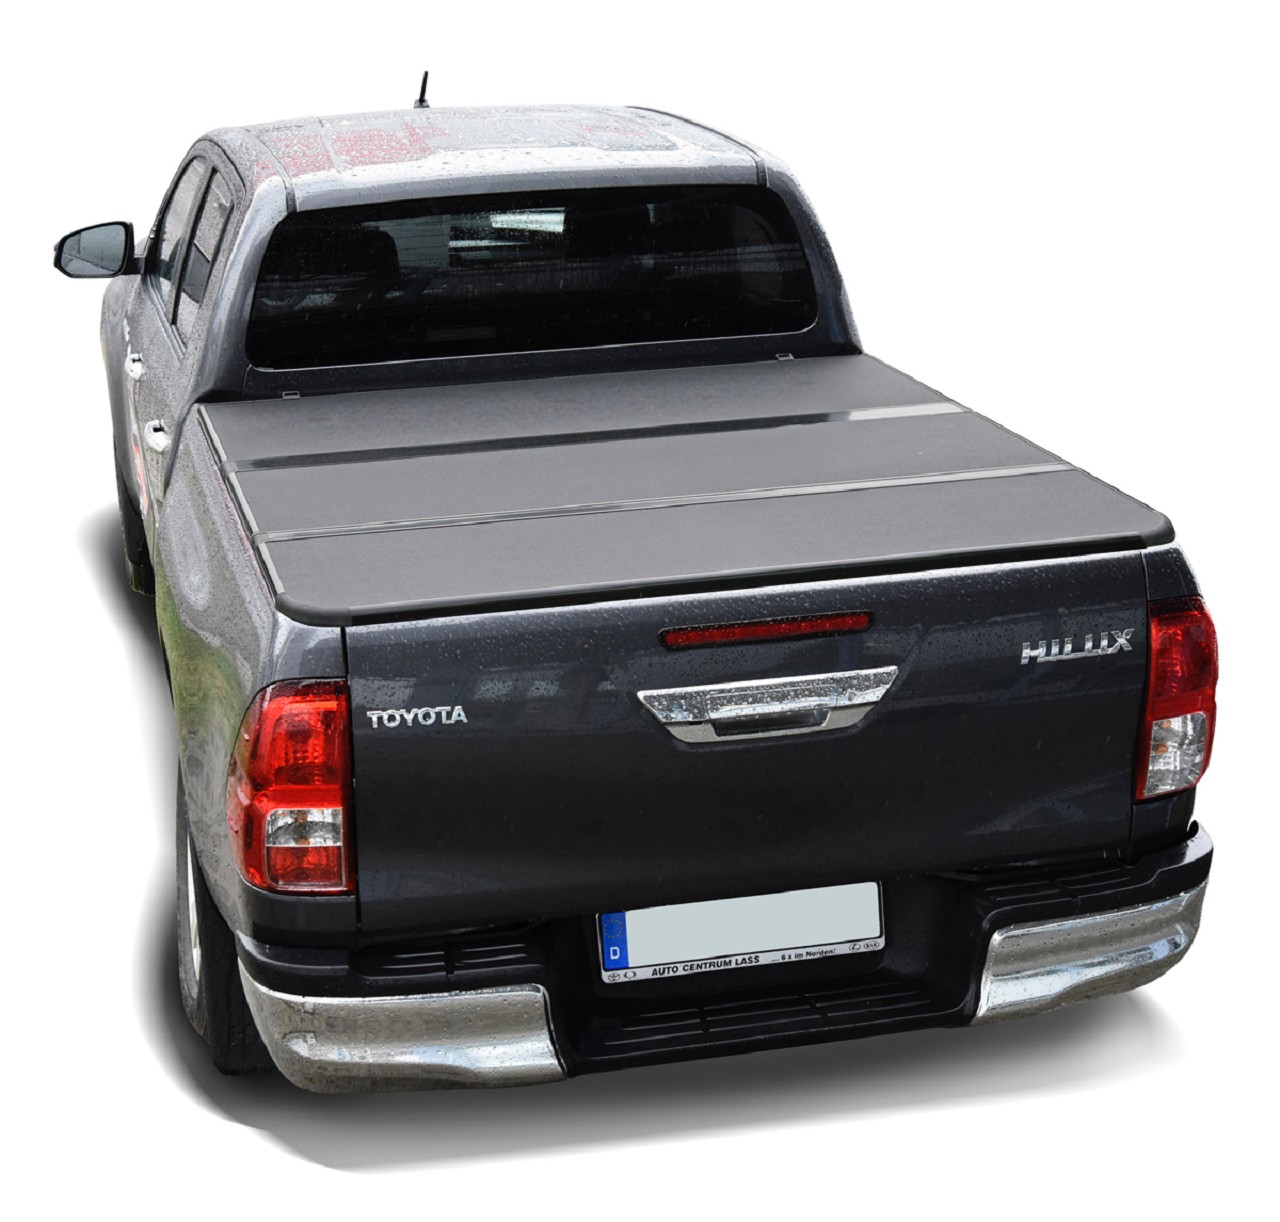 Tonneau cover foldable suitable for Toyota Hilux Revo (2015-2018) & (2019-) each only double cab